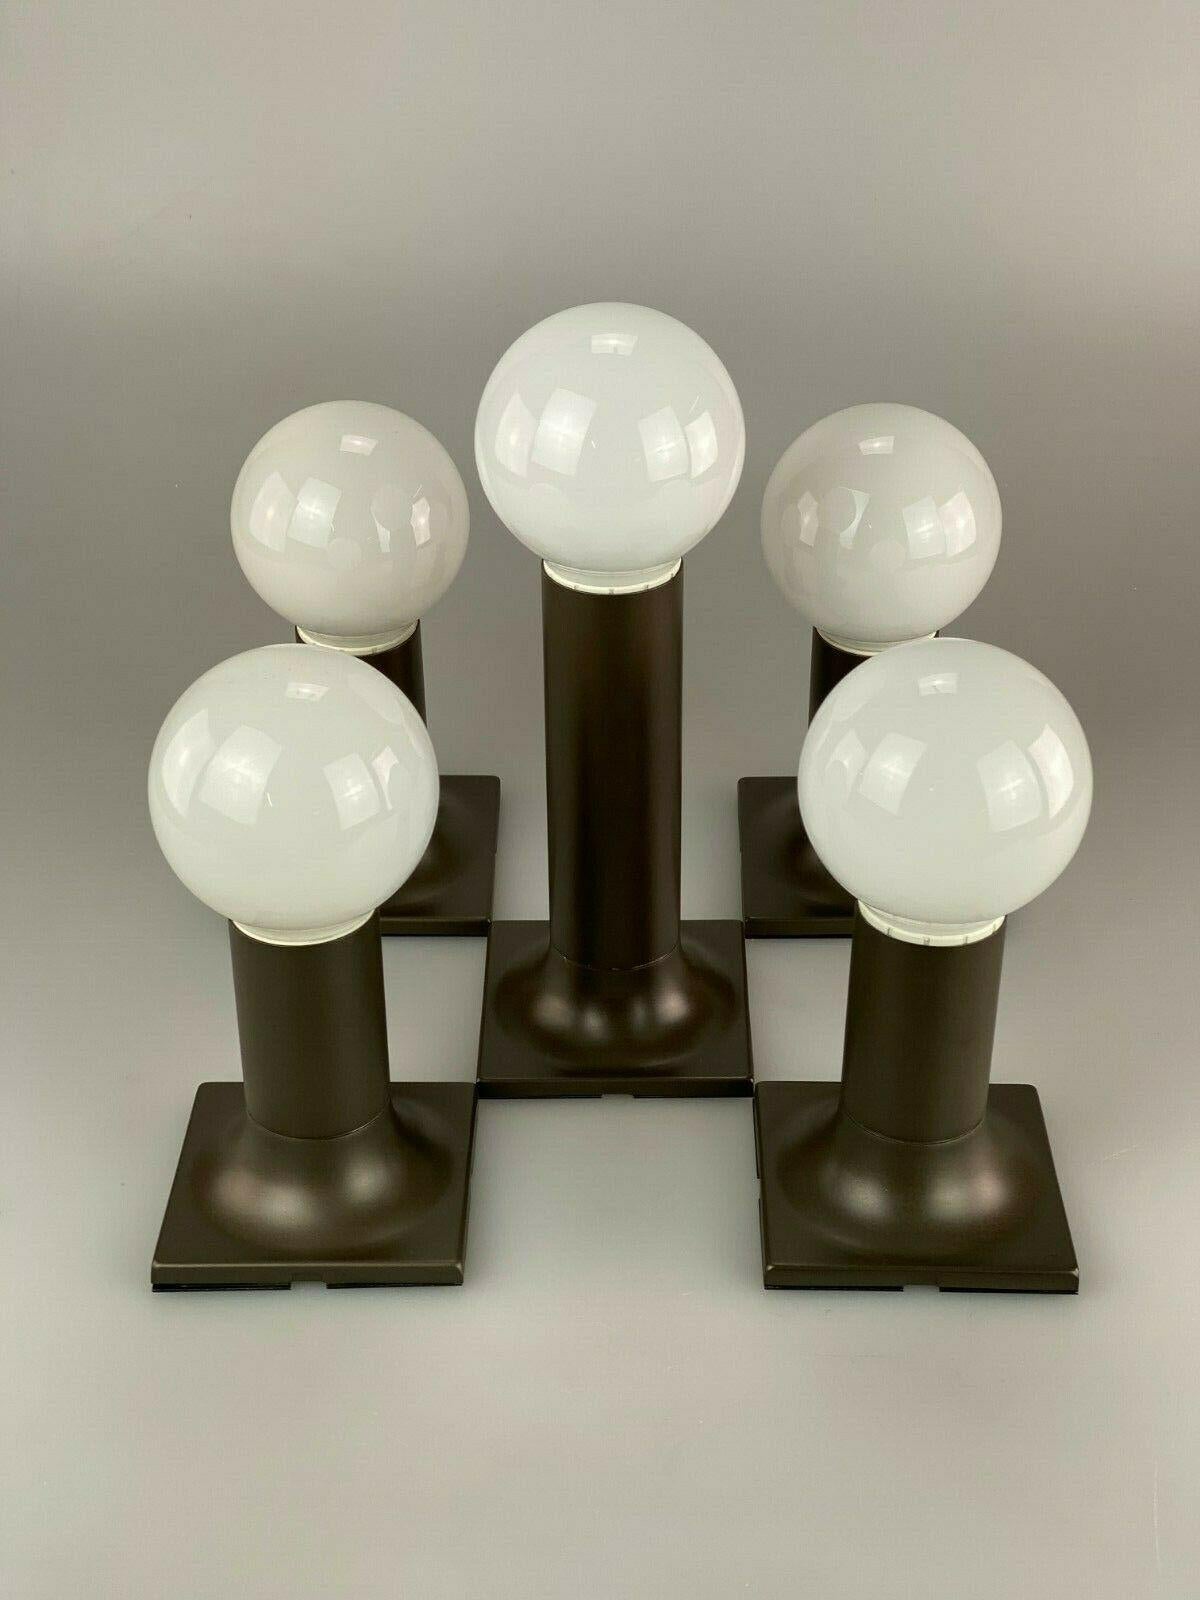 1960s 1970s wall lights tube wall lamps by Rolf Krüger for Staff 60s 70s

Object: Set of 5 wall lamps

Manufacturer: Staff

Condition: good

Age: around 1960-1970

Dimensions:

10.5cm x 10.5cm x 20cm
10.5cm x 10.5cm x 12cm

Other